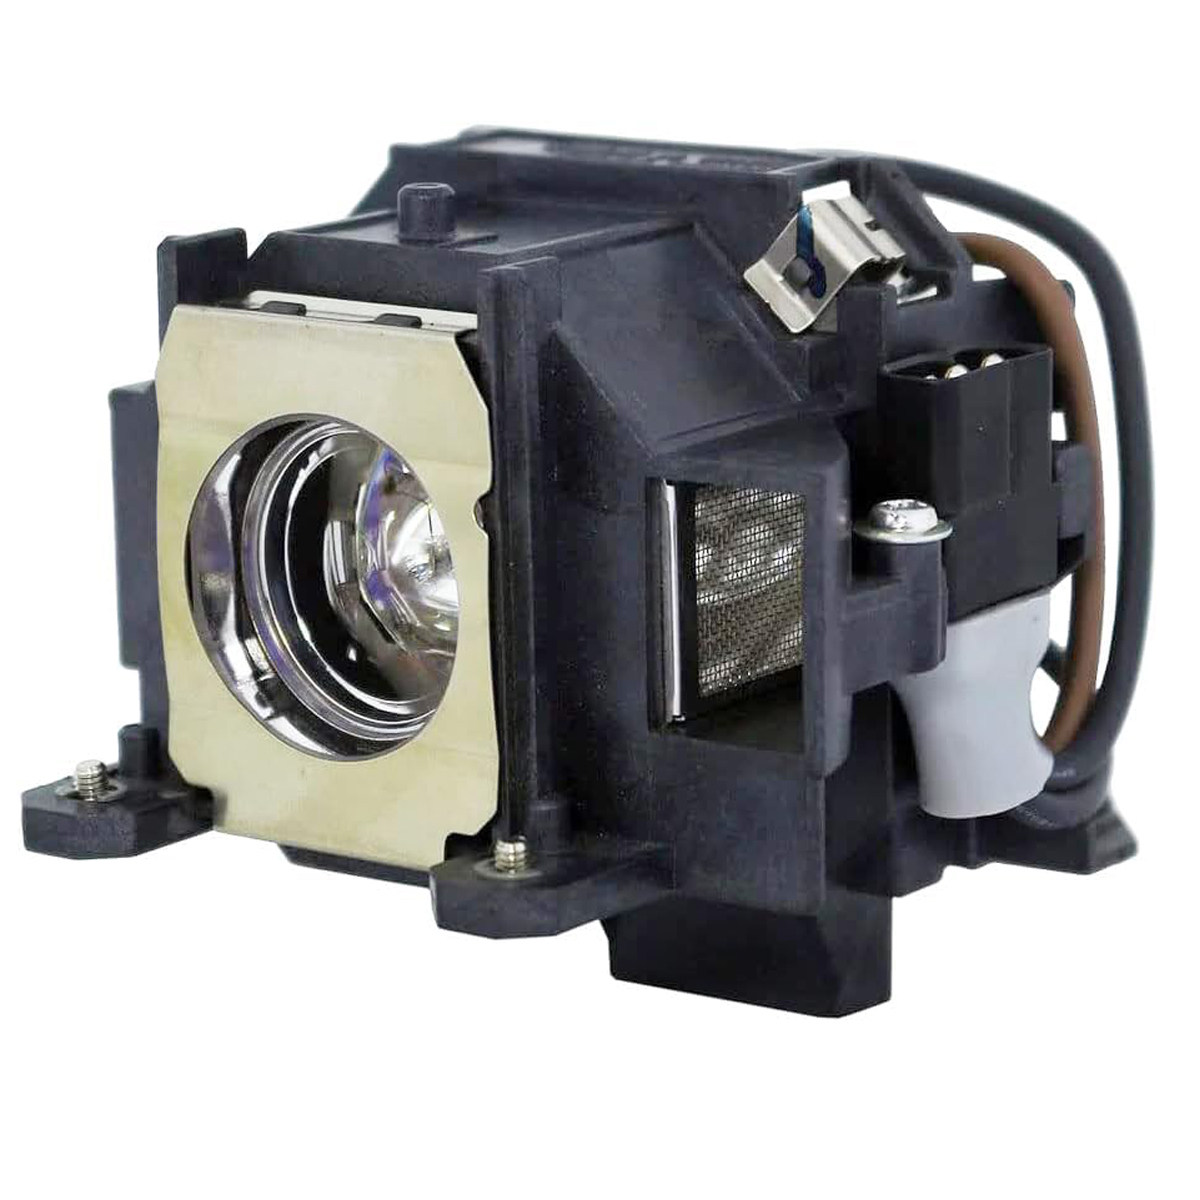 Replacement Projector lamp ELPLP40 For Epson EB-1810 EB-1825 EMP-1810 EMP-1810P